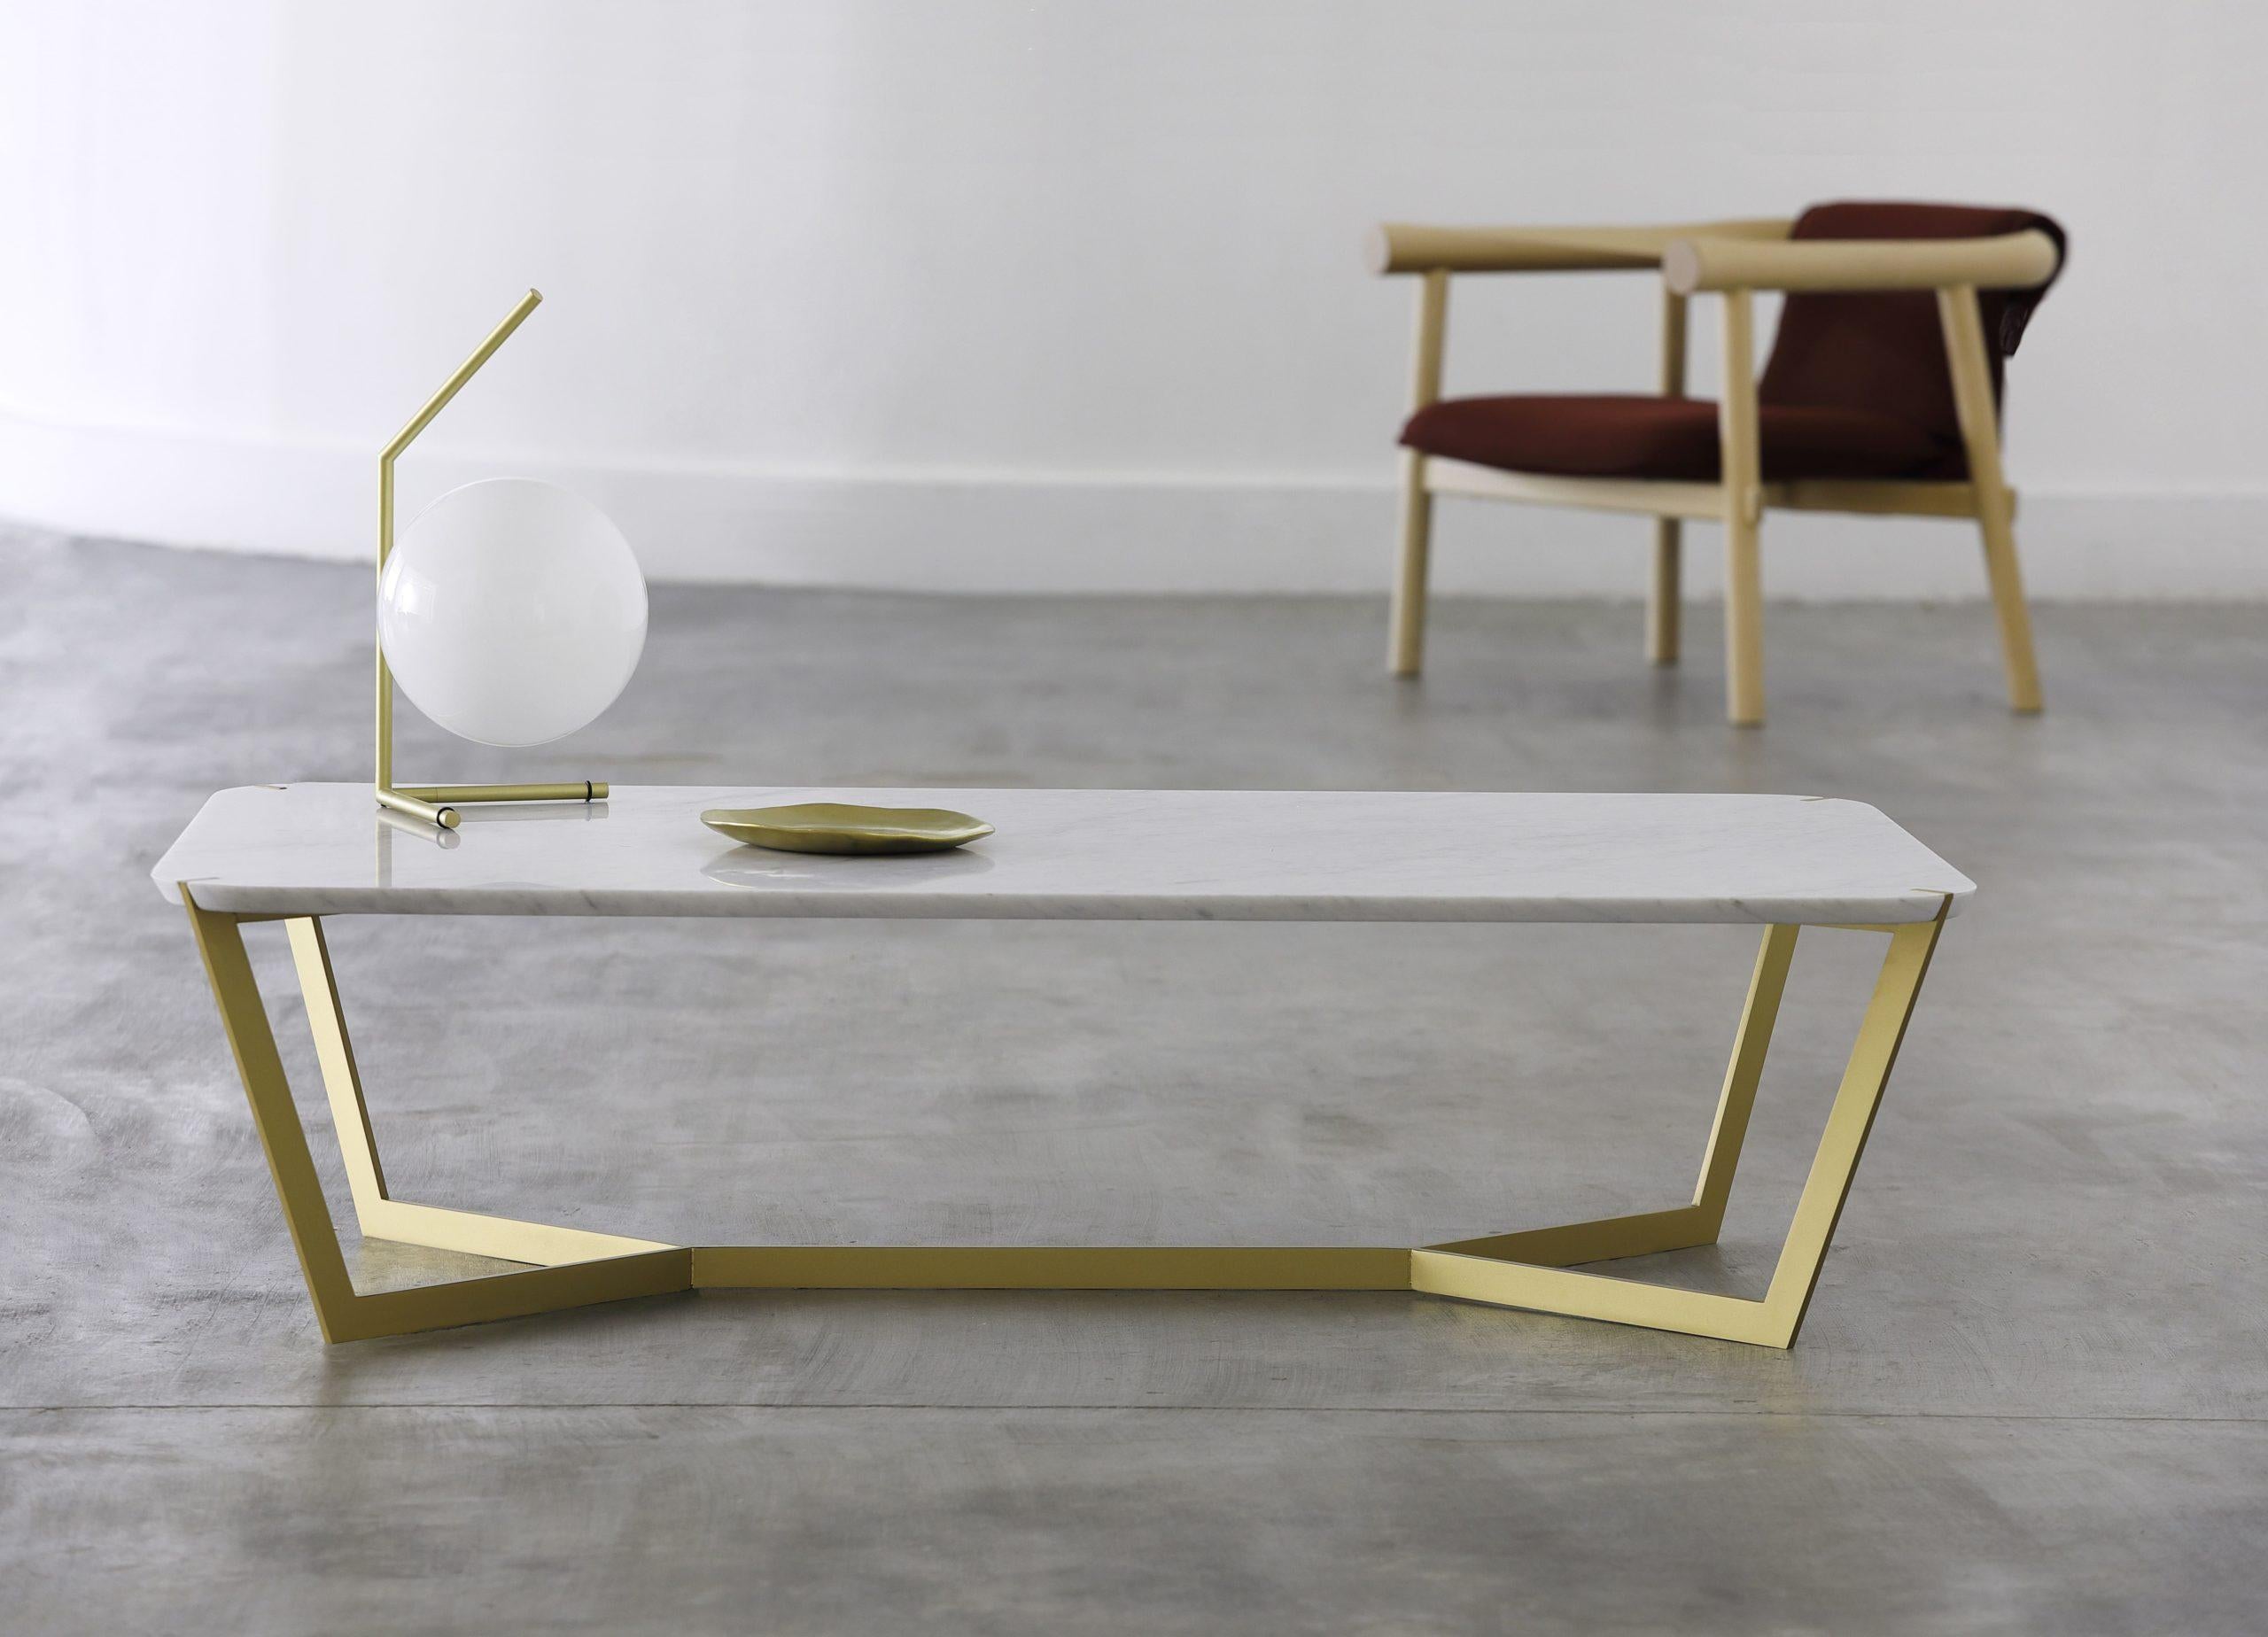 Gold carrara marble star coffee table by Olivier Gagnère
Materials: Carrara marble or black Marquina marble top. Gold lacquered metal base.
Technique: Lacquered metal, polished marble. 
Dimensions: D 70 x W 125 x H35cm
Also available in nero